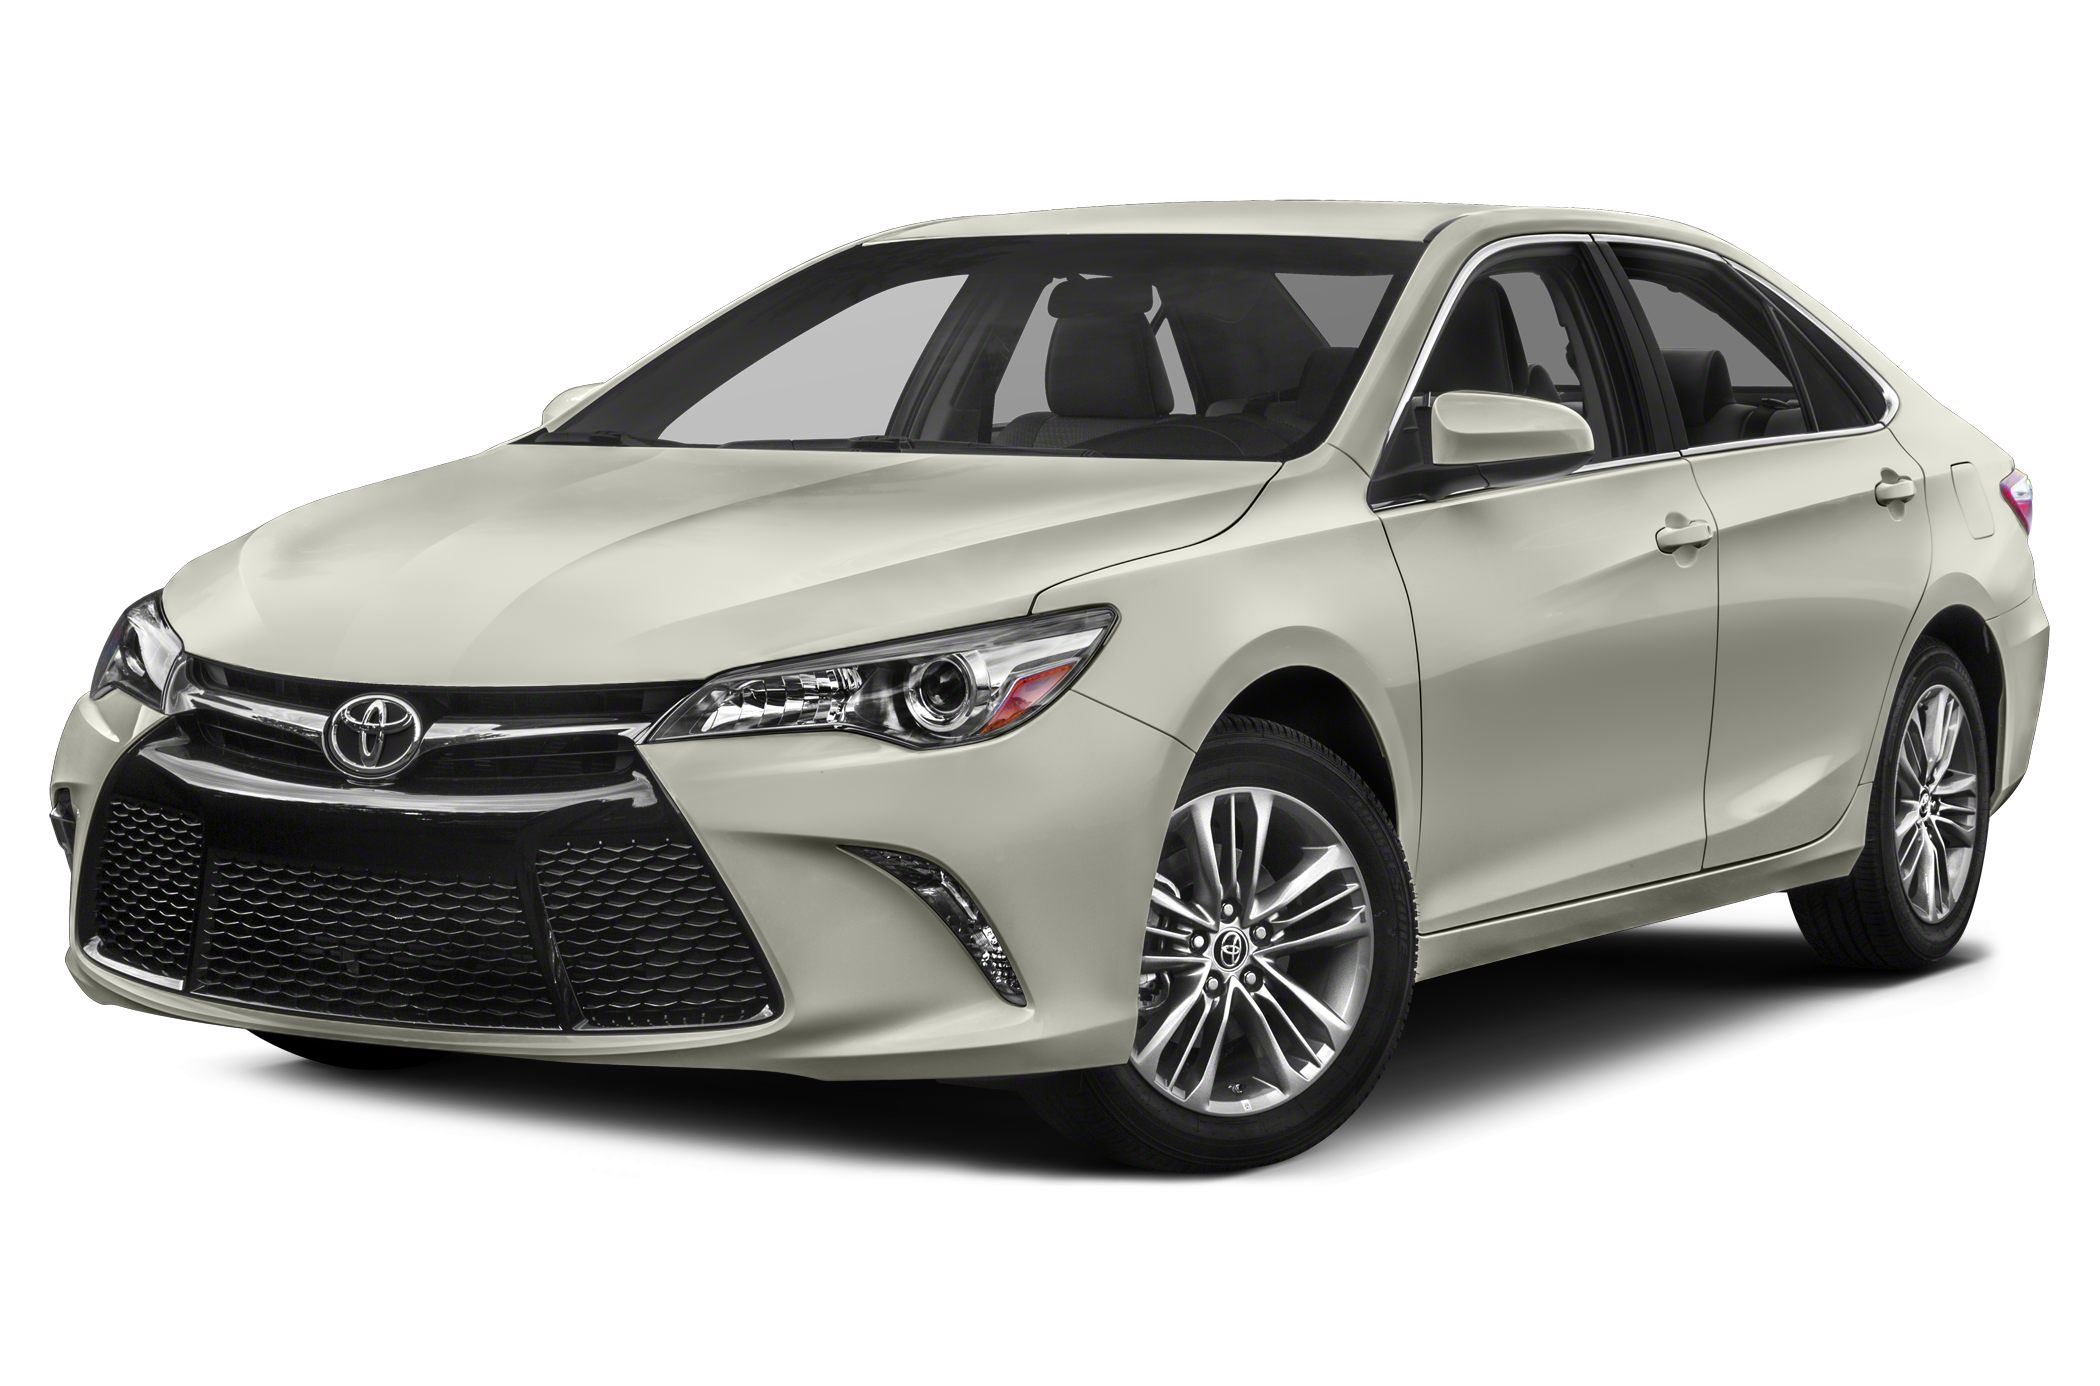 2017 Toyota Camry Xse 4dr Sedan Pricing And Options